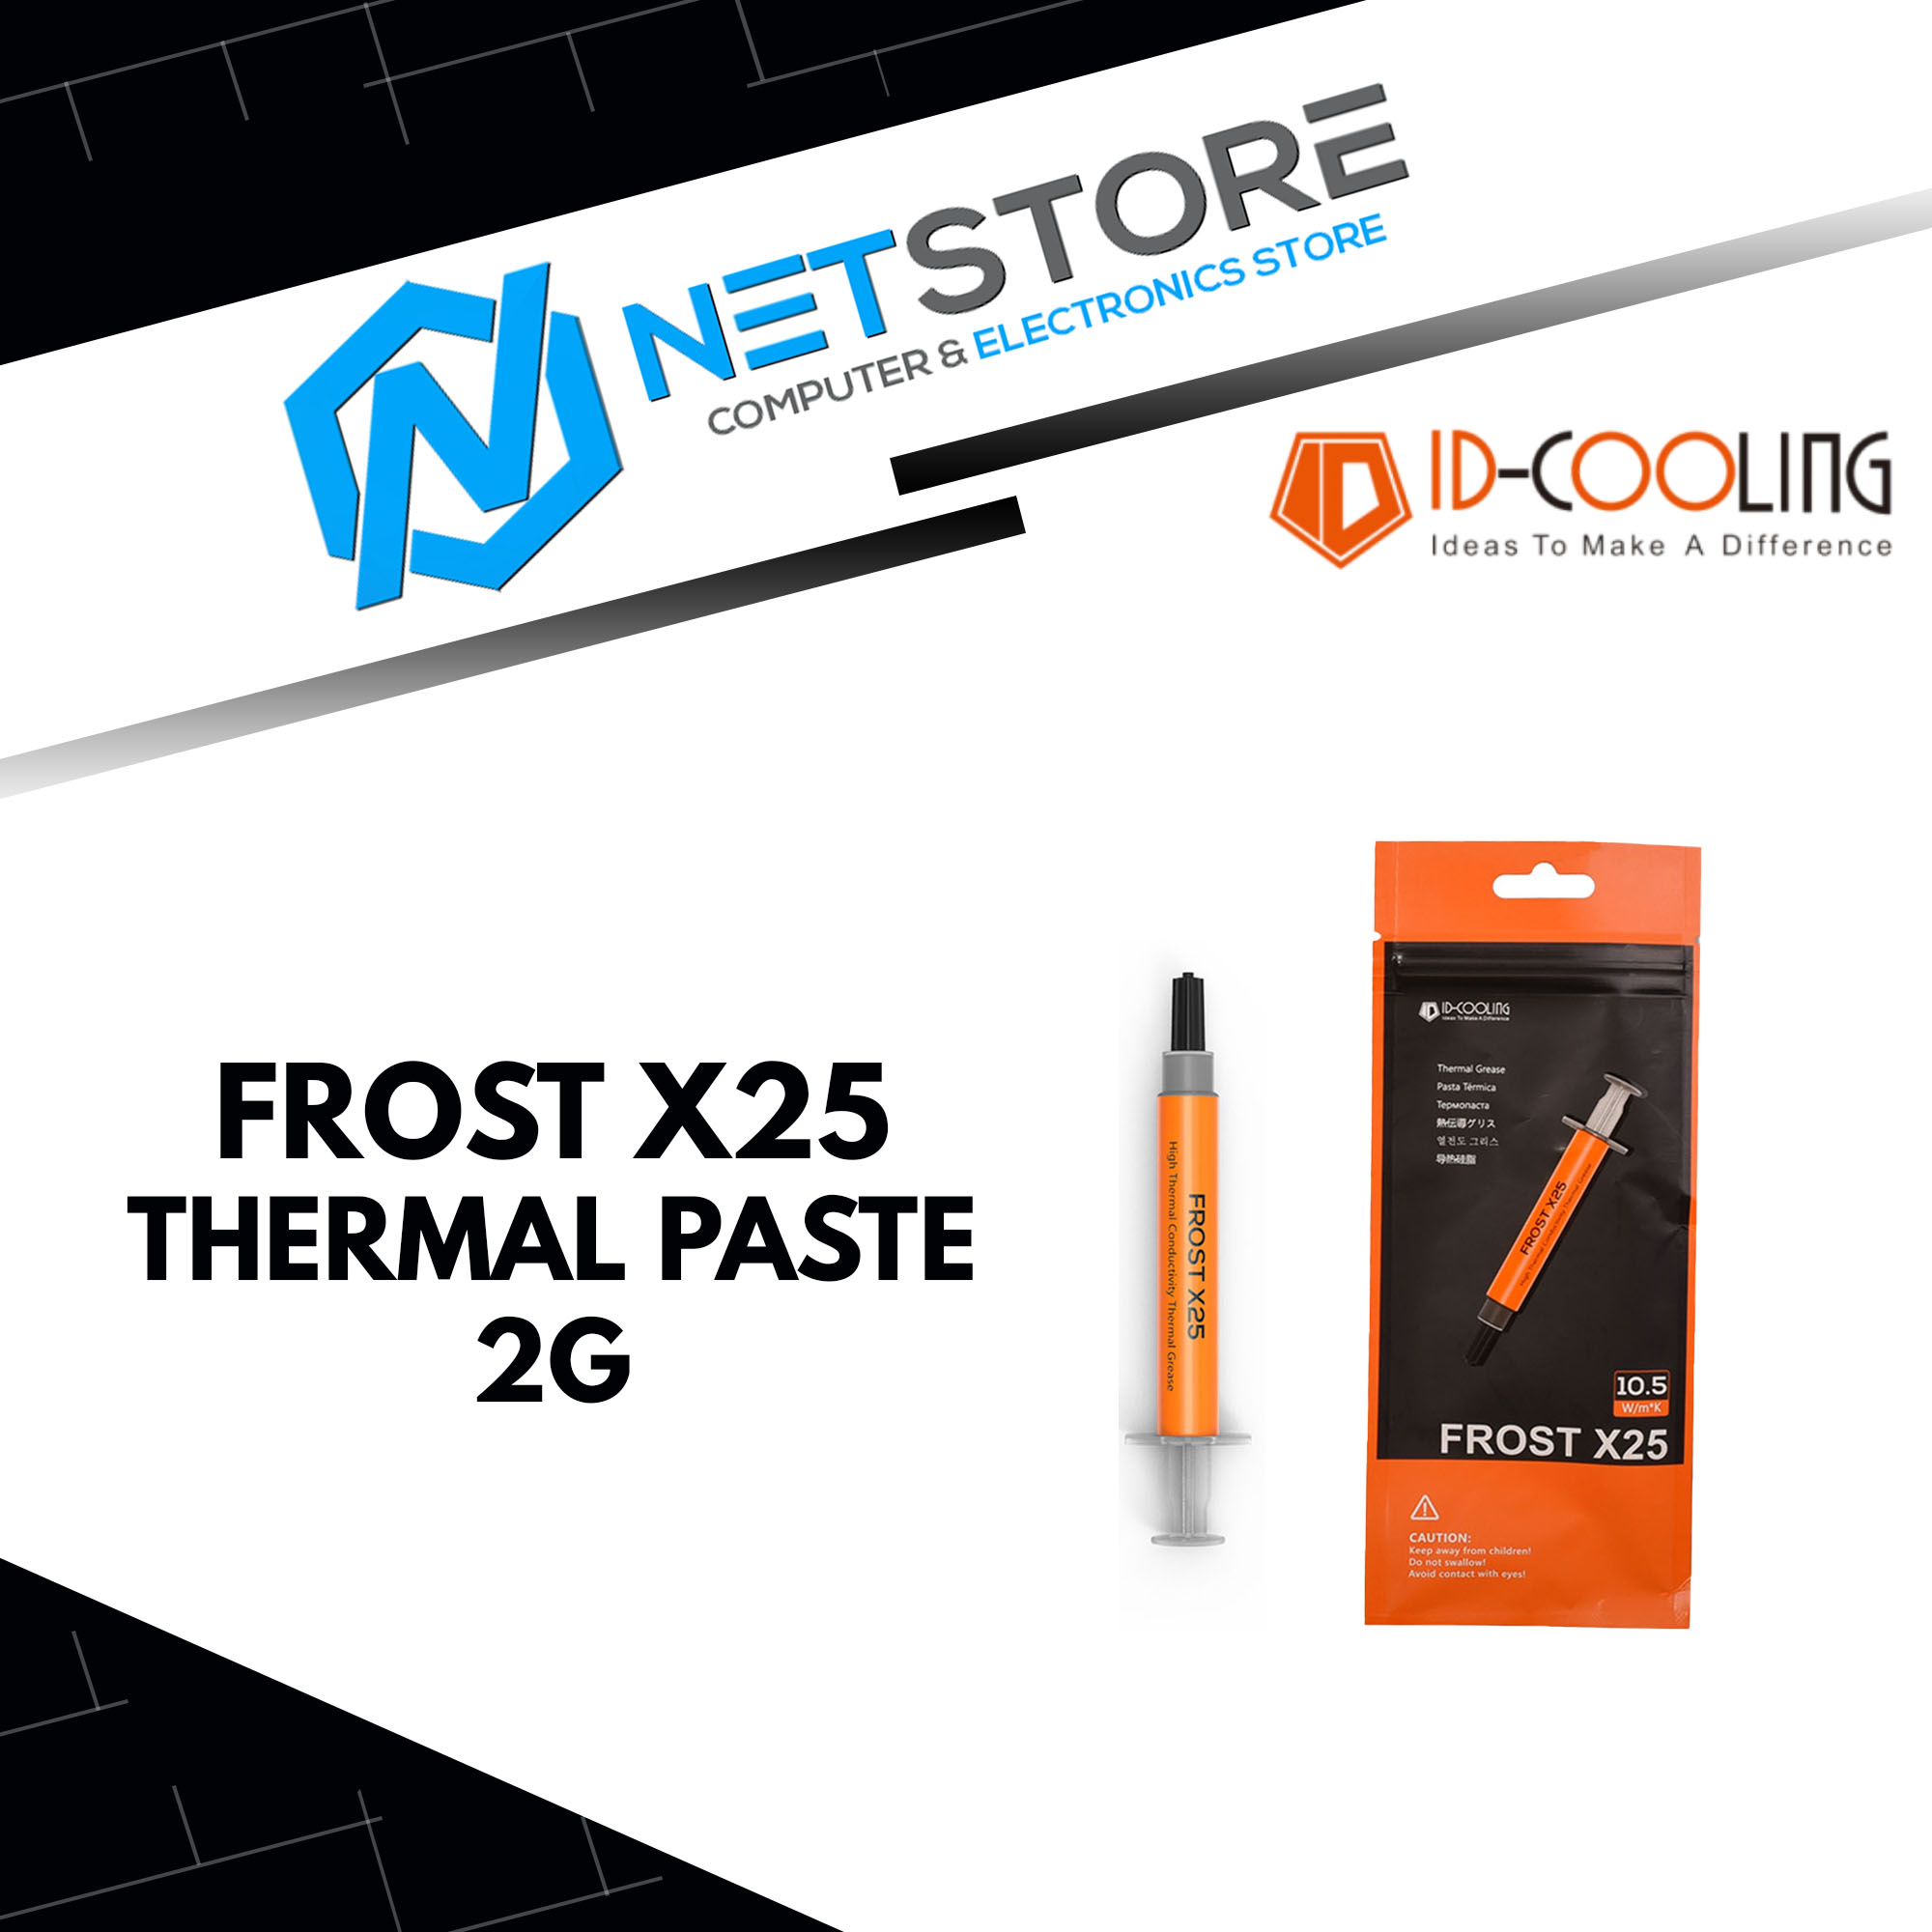 ID-COOLING FROST X25 THERMAL PASTE 2G